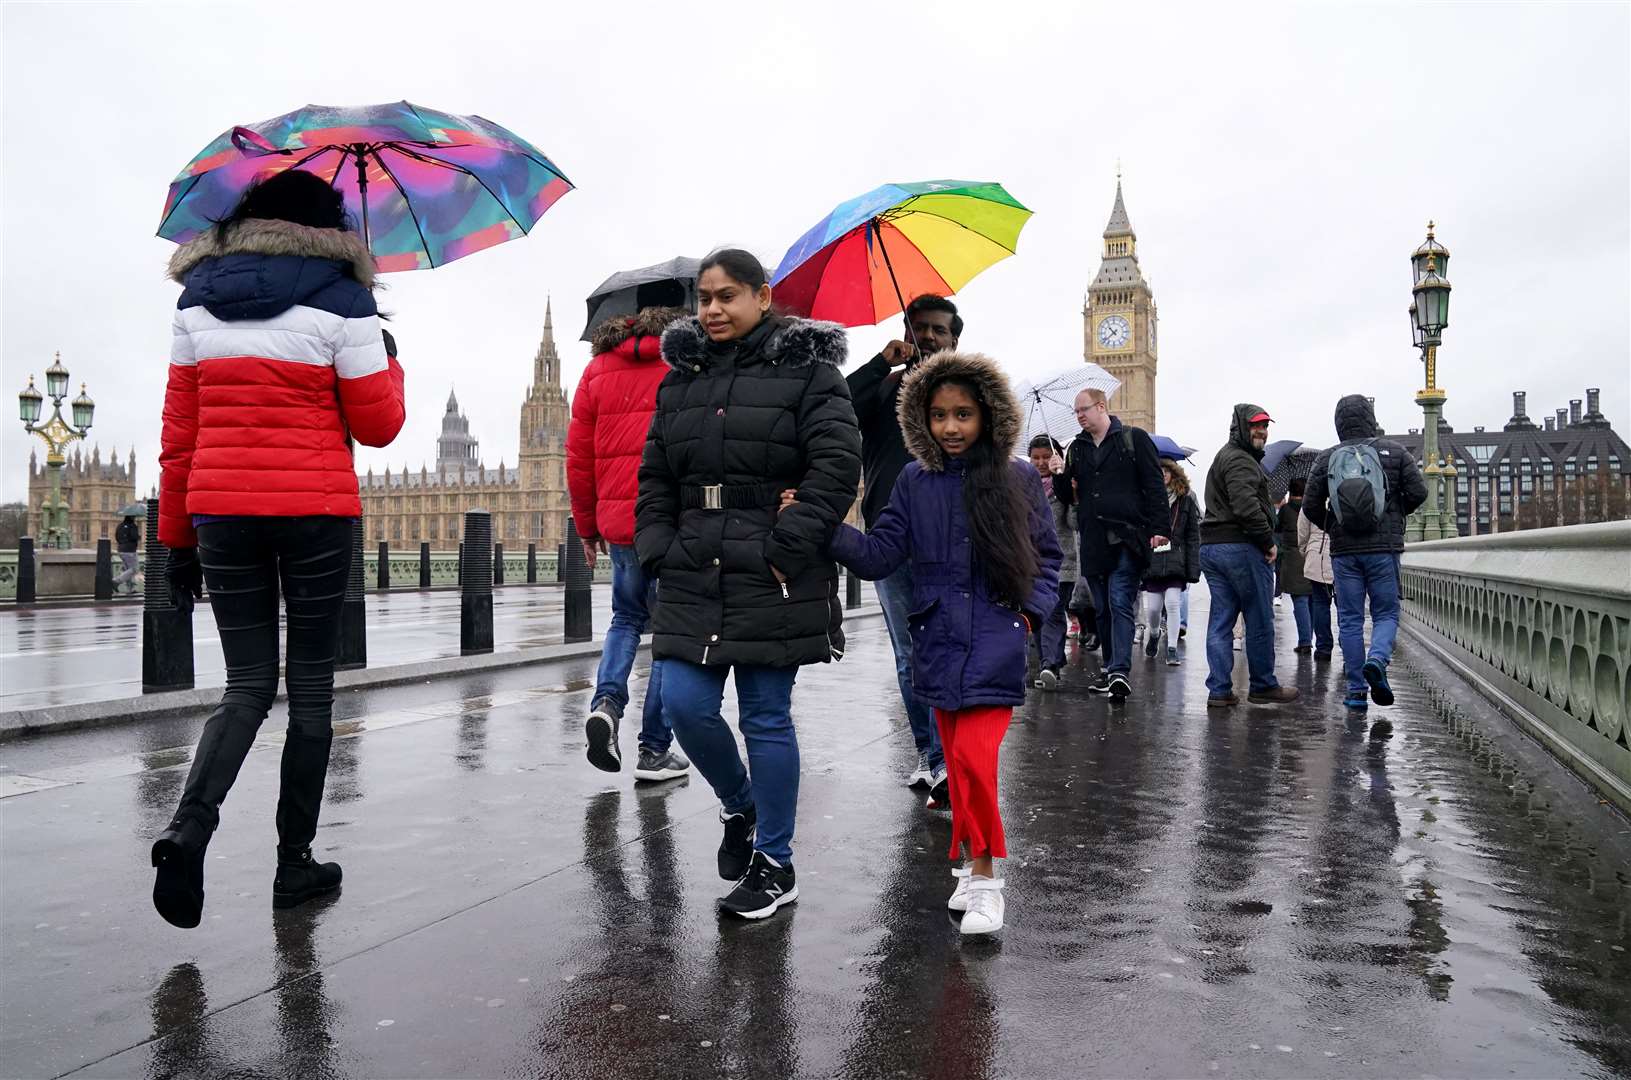 People brave the rainy conditions on Westminster Bridge, London last week (PA)